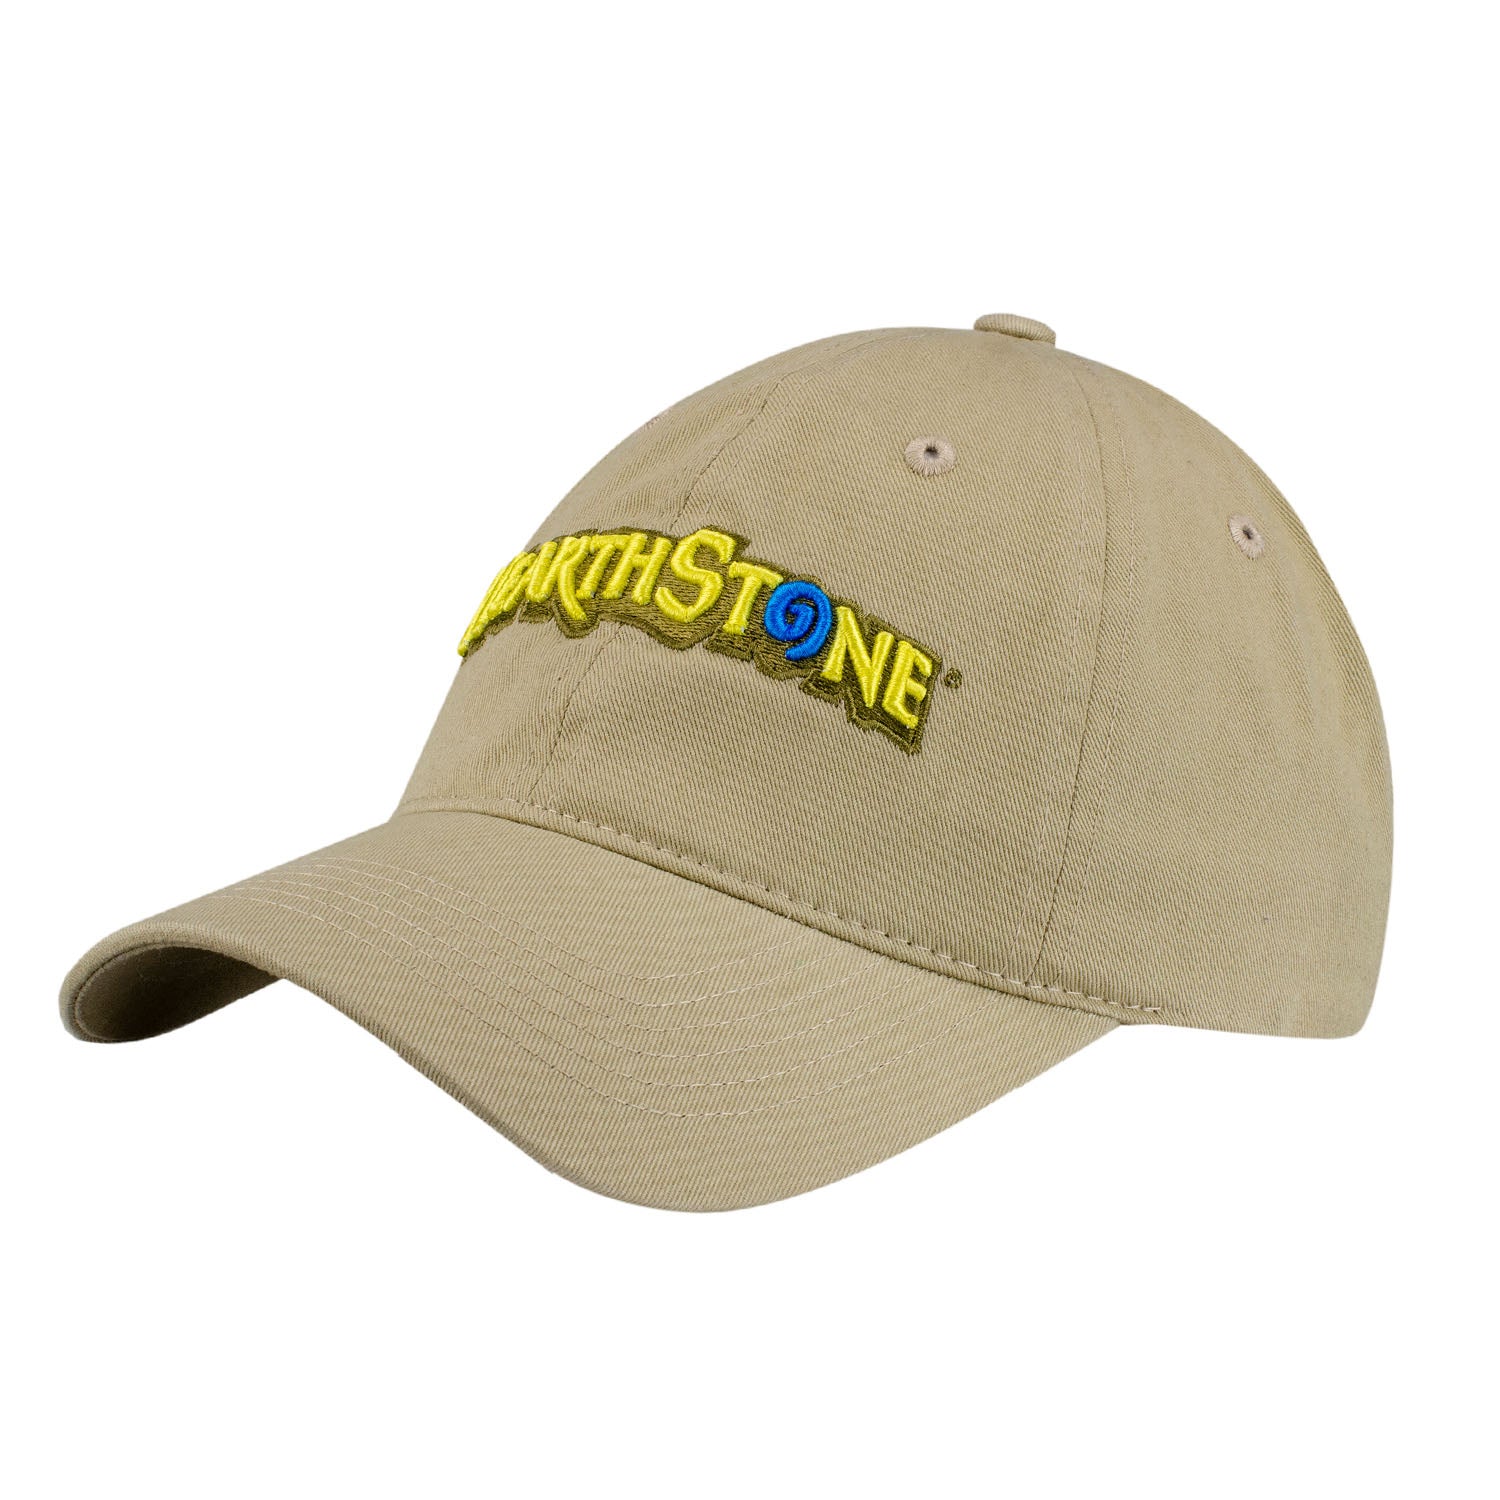 Hearthstone Tan Hat - Left View